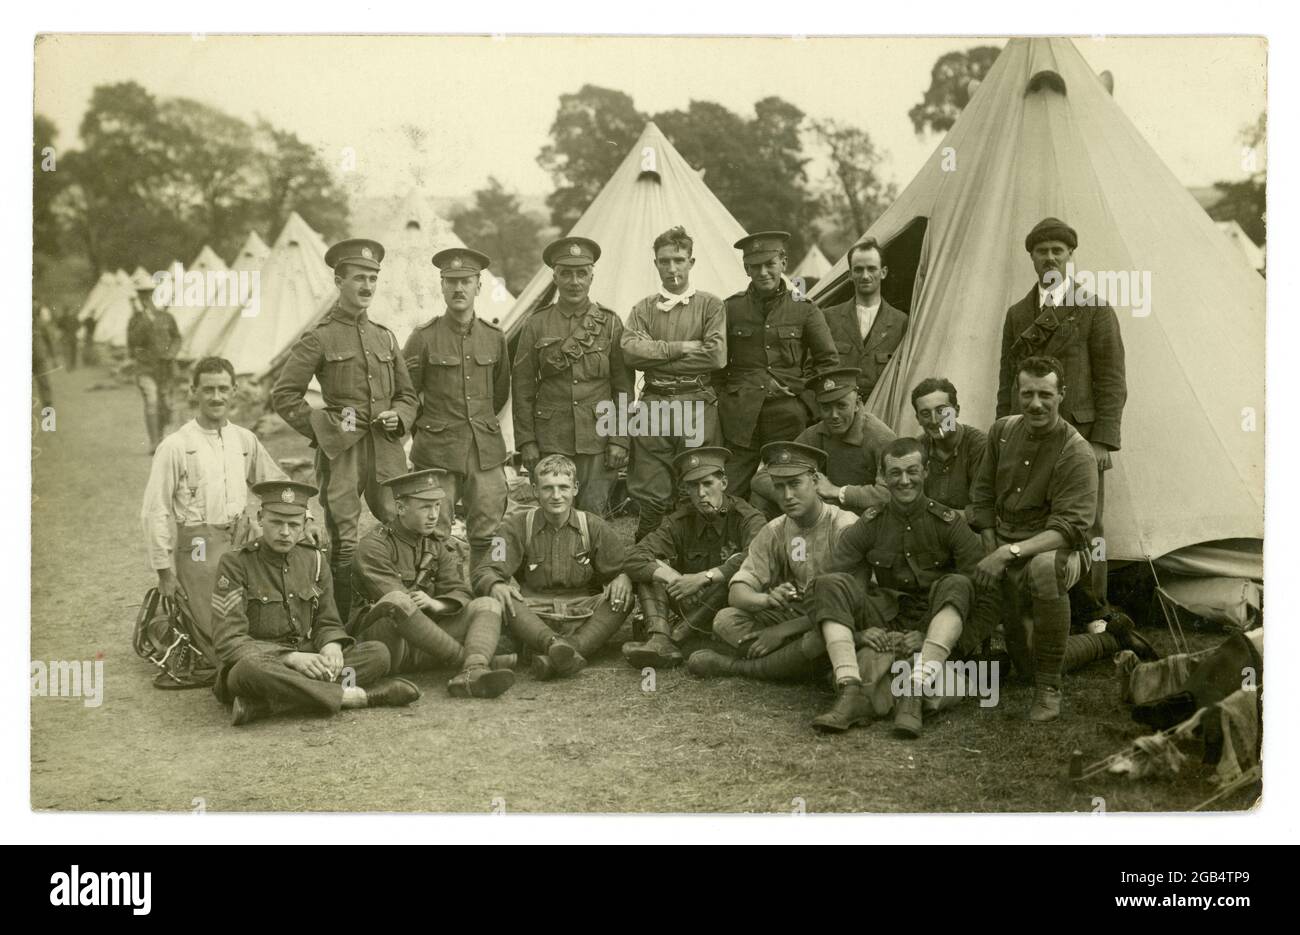 WW1 era postcard of young men possibly of the elite Territorial Westminster Dragoons or 2nd County of London Yeomanry (a cavalry regiment) posted 6 October 1914, a few months after the call for mobilisation came - at their summer camp at Goring-on-Thames, South Oxfordshire, U.K. Stock Photo